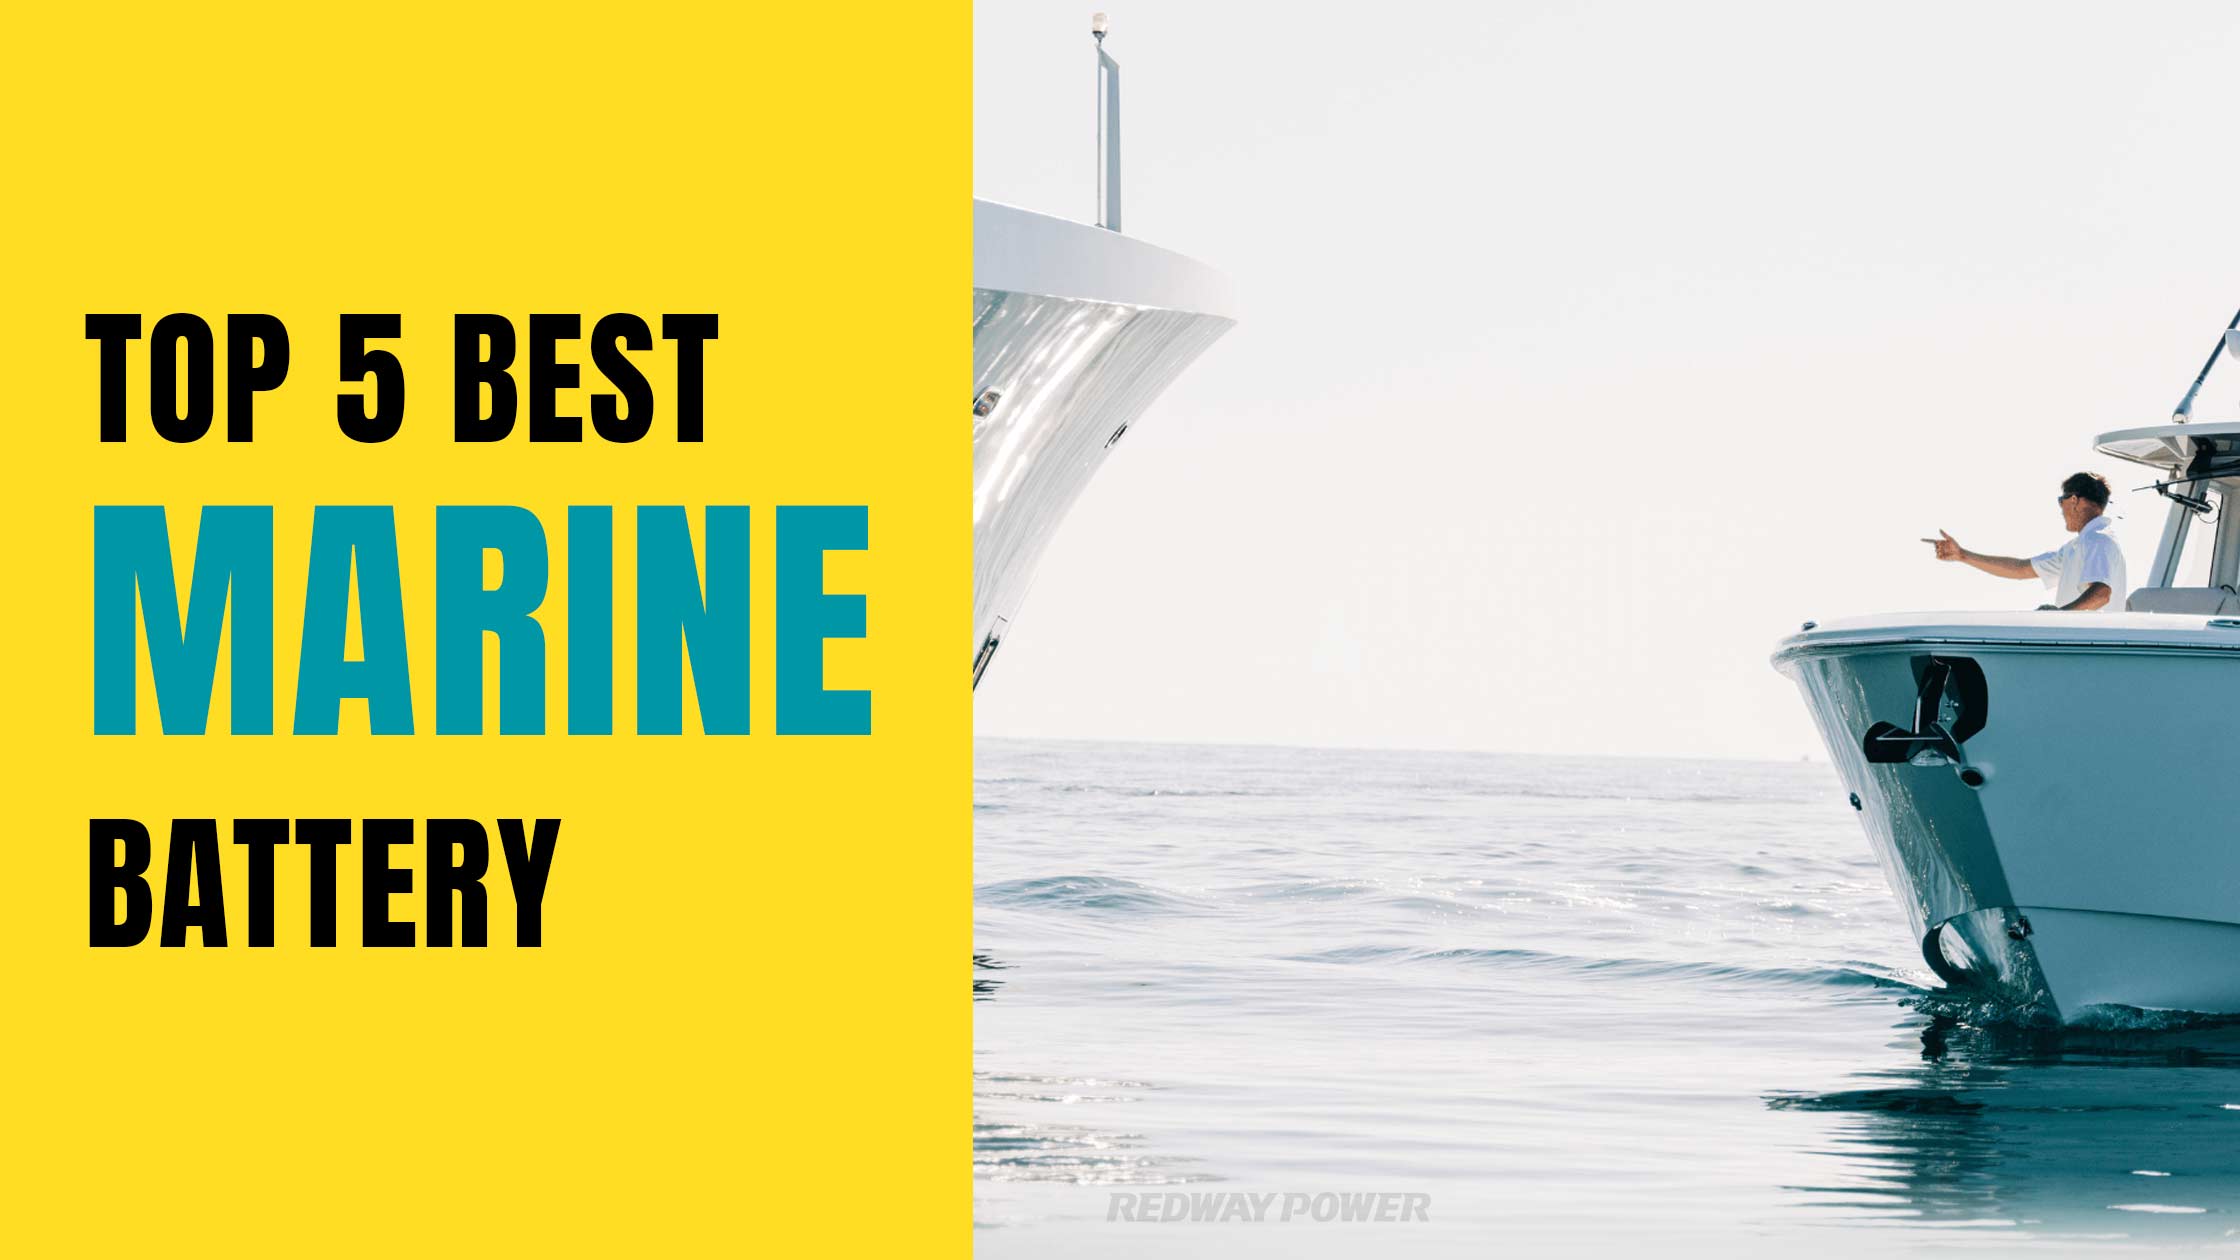 Top 5 Best Marine Batteries on the Market. What Is The Best Marine Battery? redway